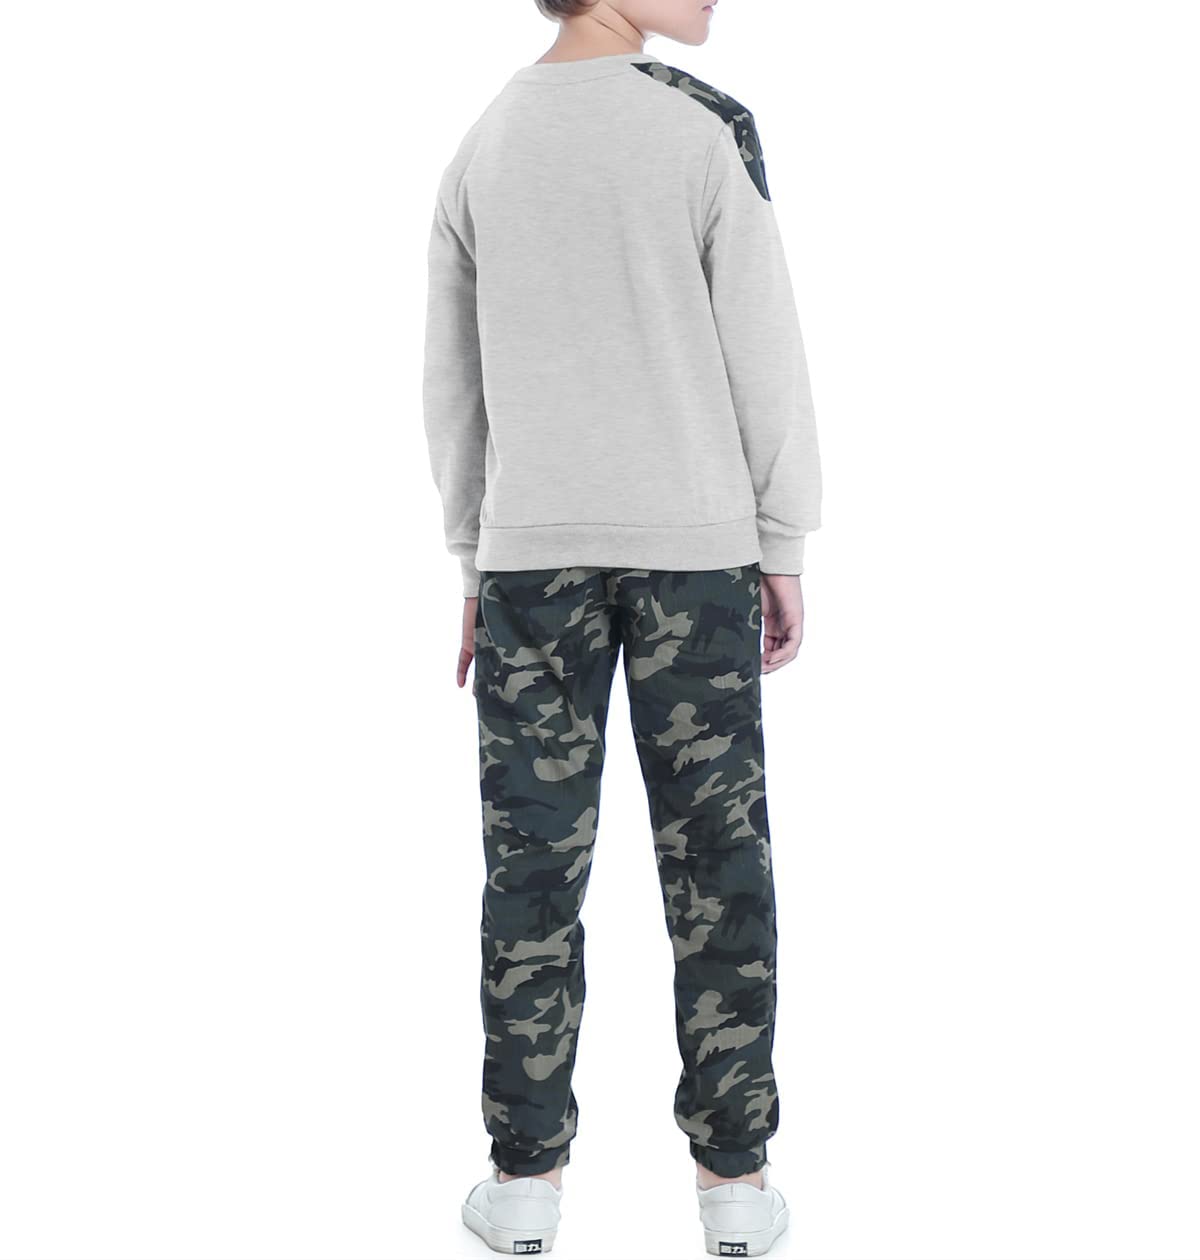 Boys Clothes Sweatsuits Casual Outfits Cotton Long Sleeve T-shirts and Camouflage Pants Set (4-5 Years)